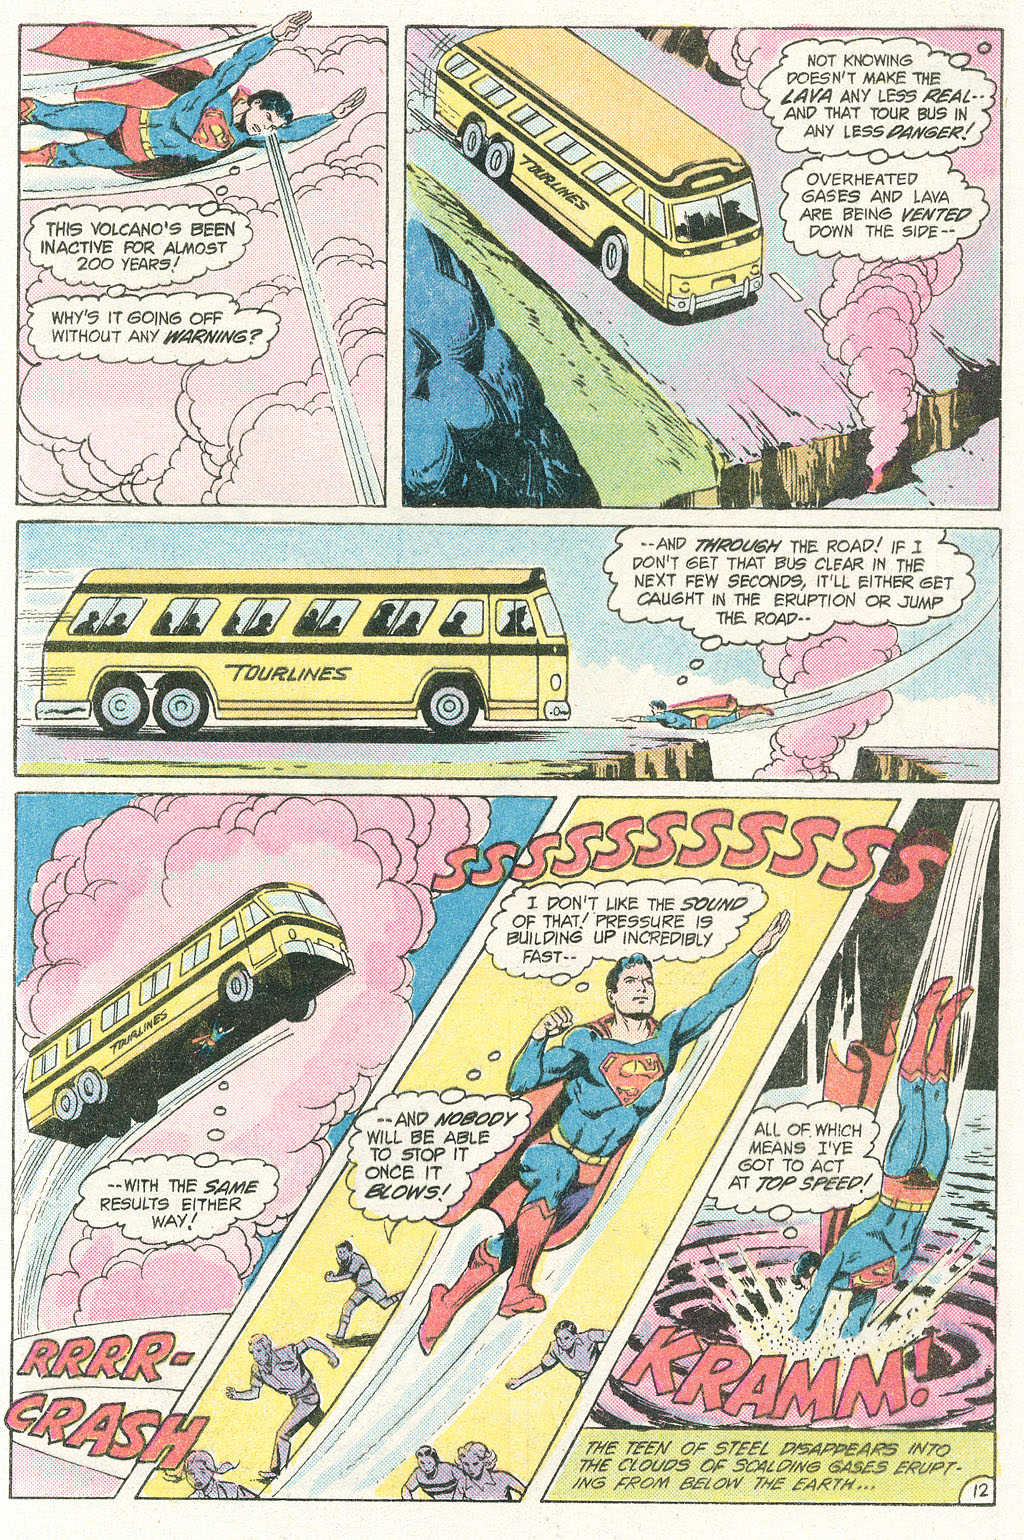 The New Adventures of Superboy 54 Page 16